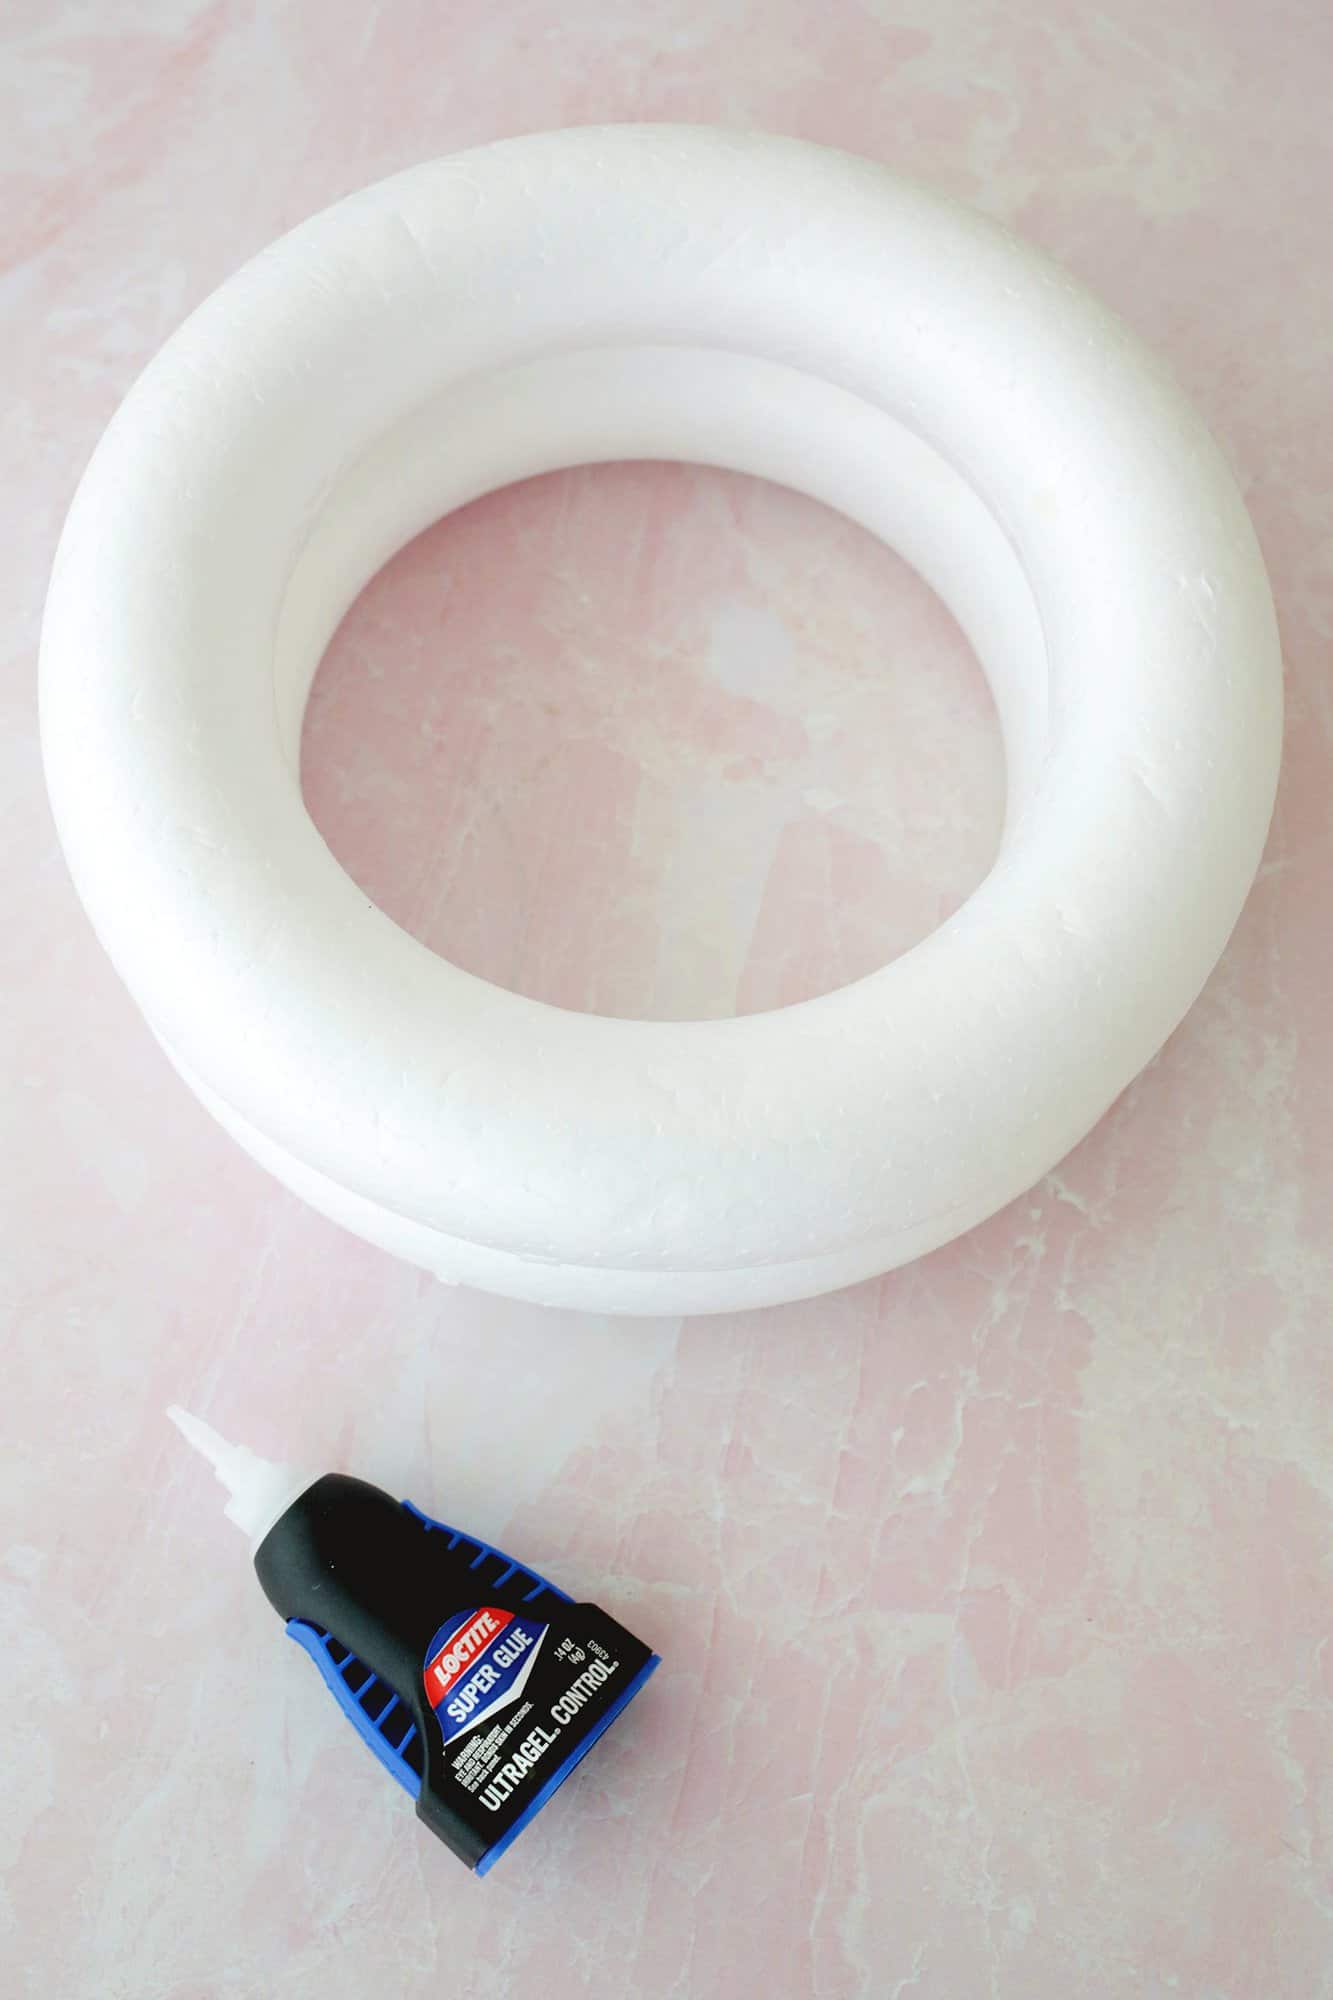 Glue the foam rings together